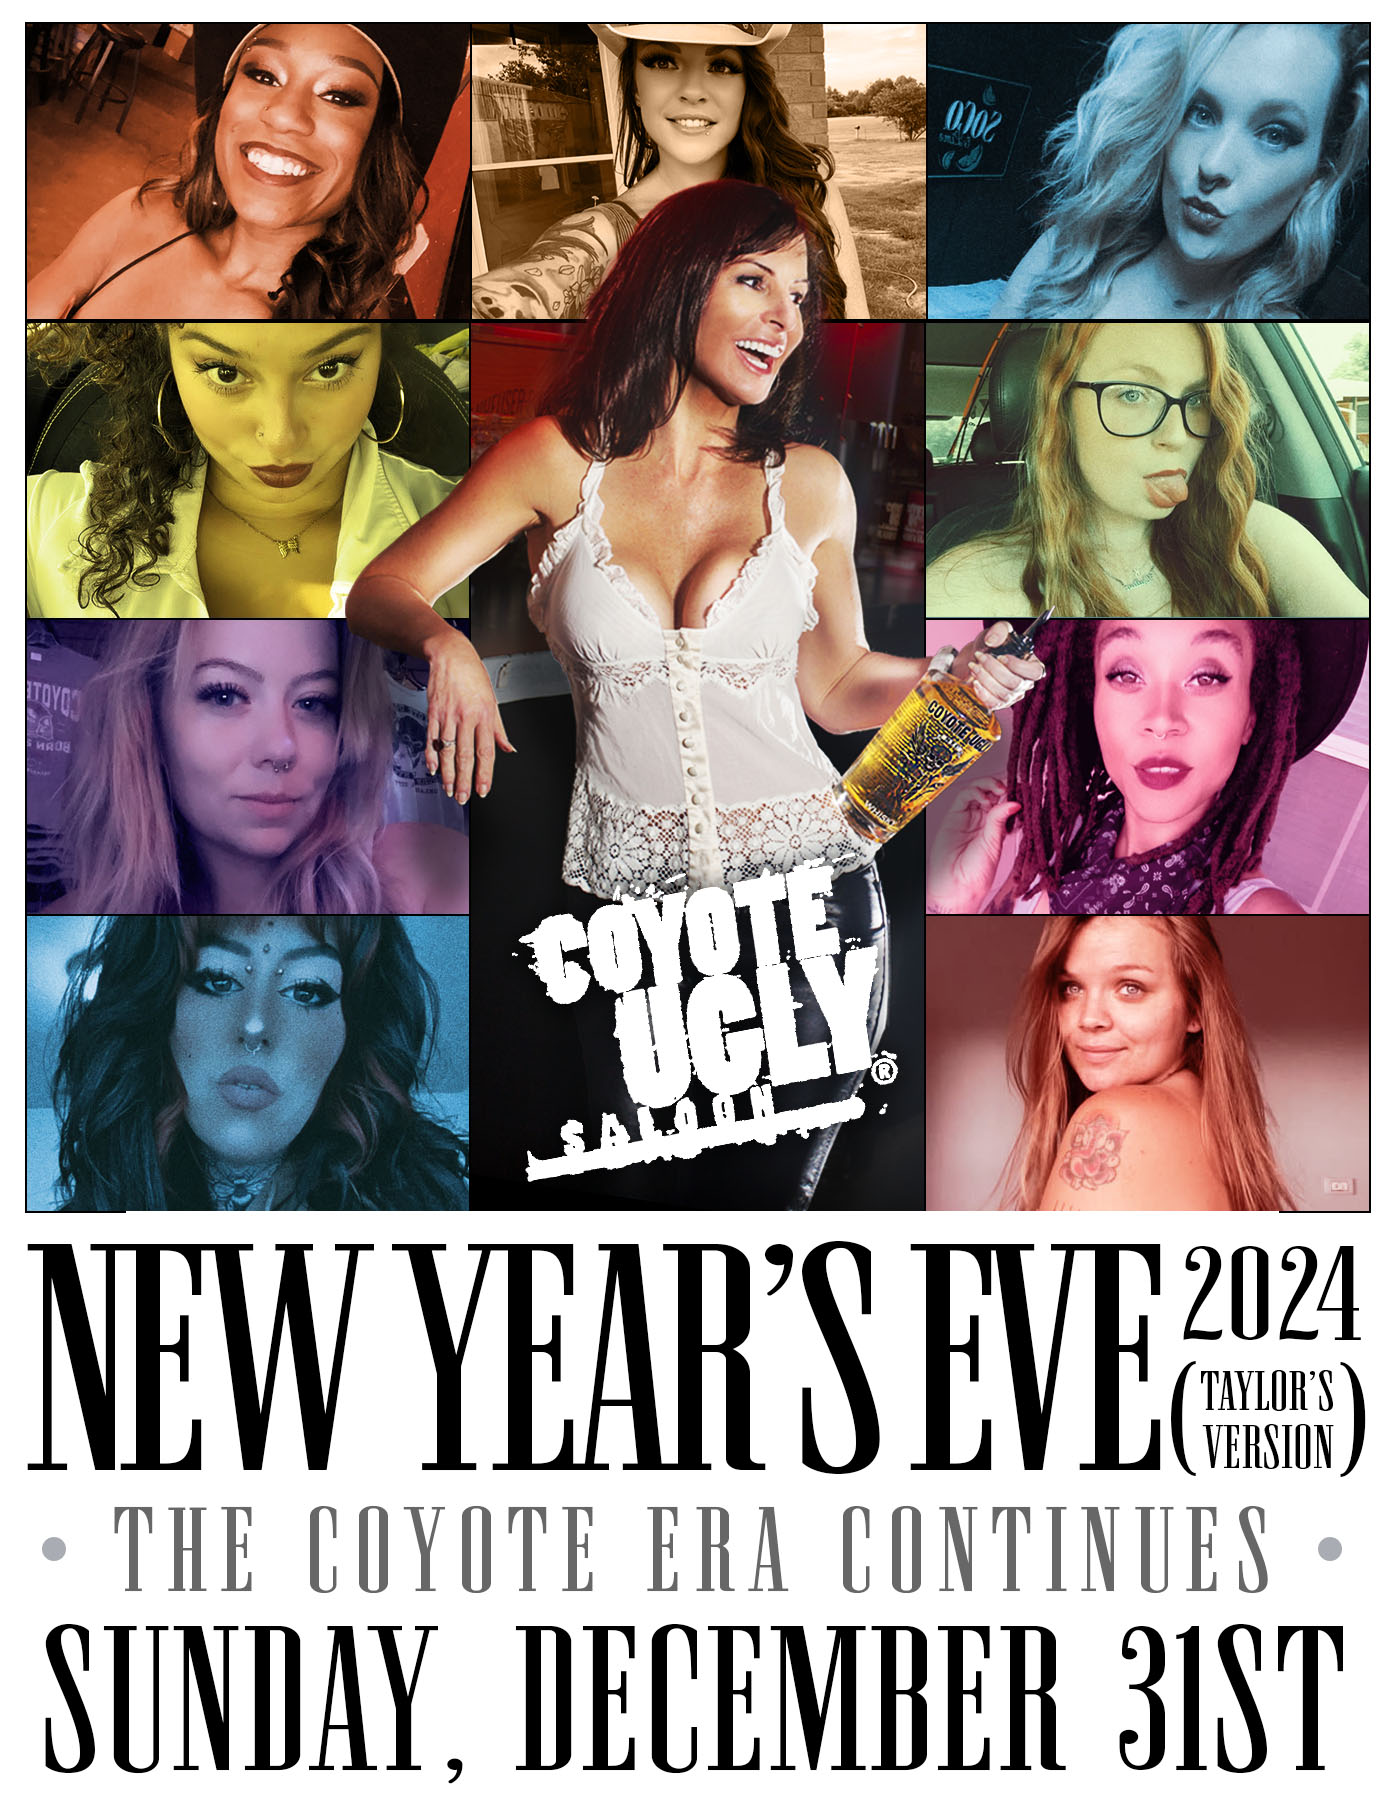 Oklahoma City: New Year’s Eve – 2024 (Taylor’s Version): December 31, 2023